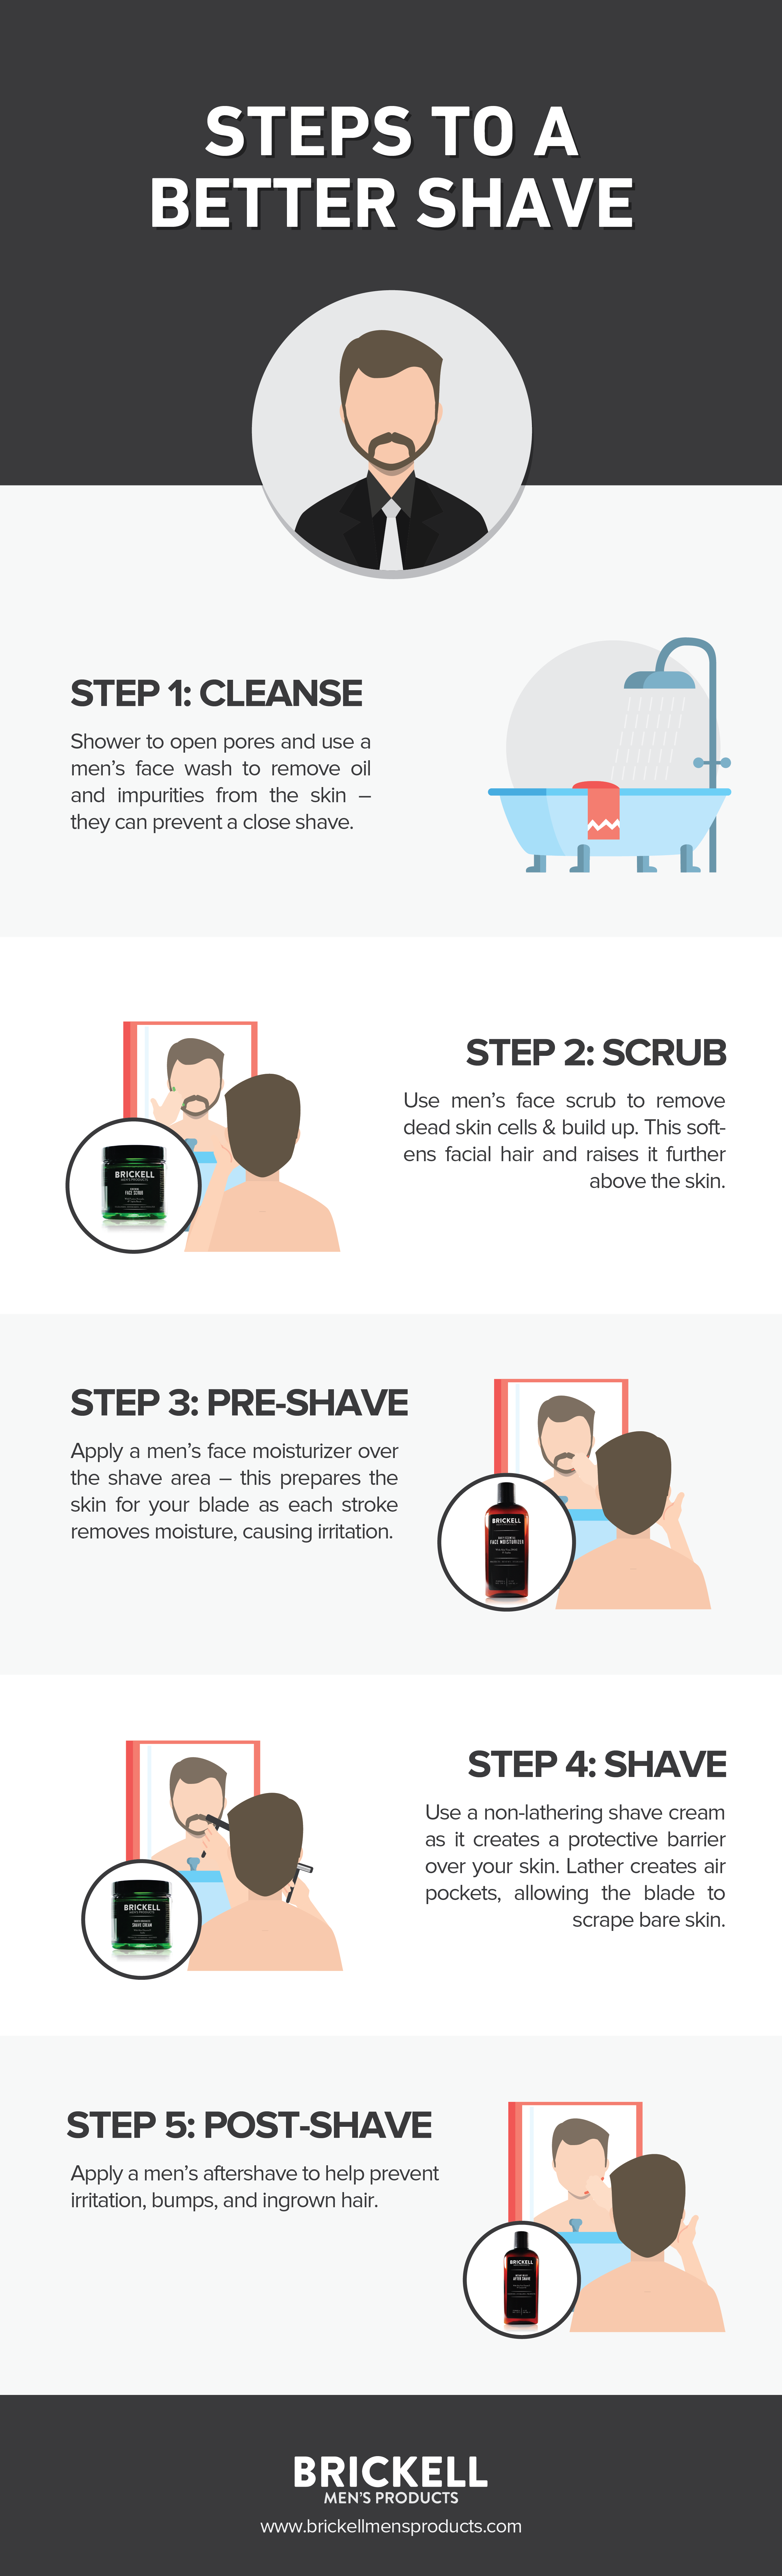 Infographic Steps To A Better Shave